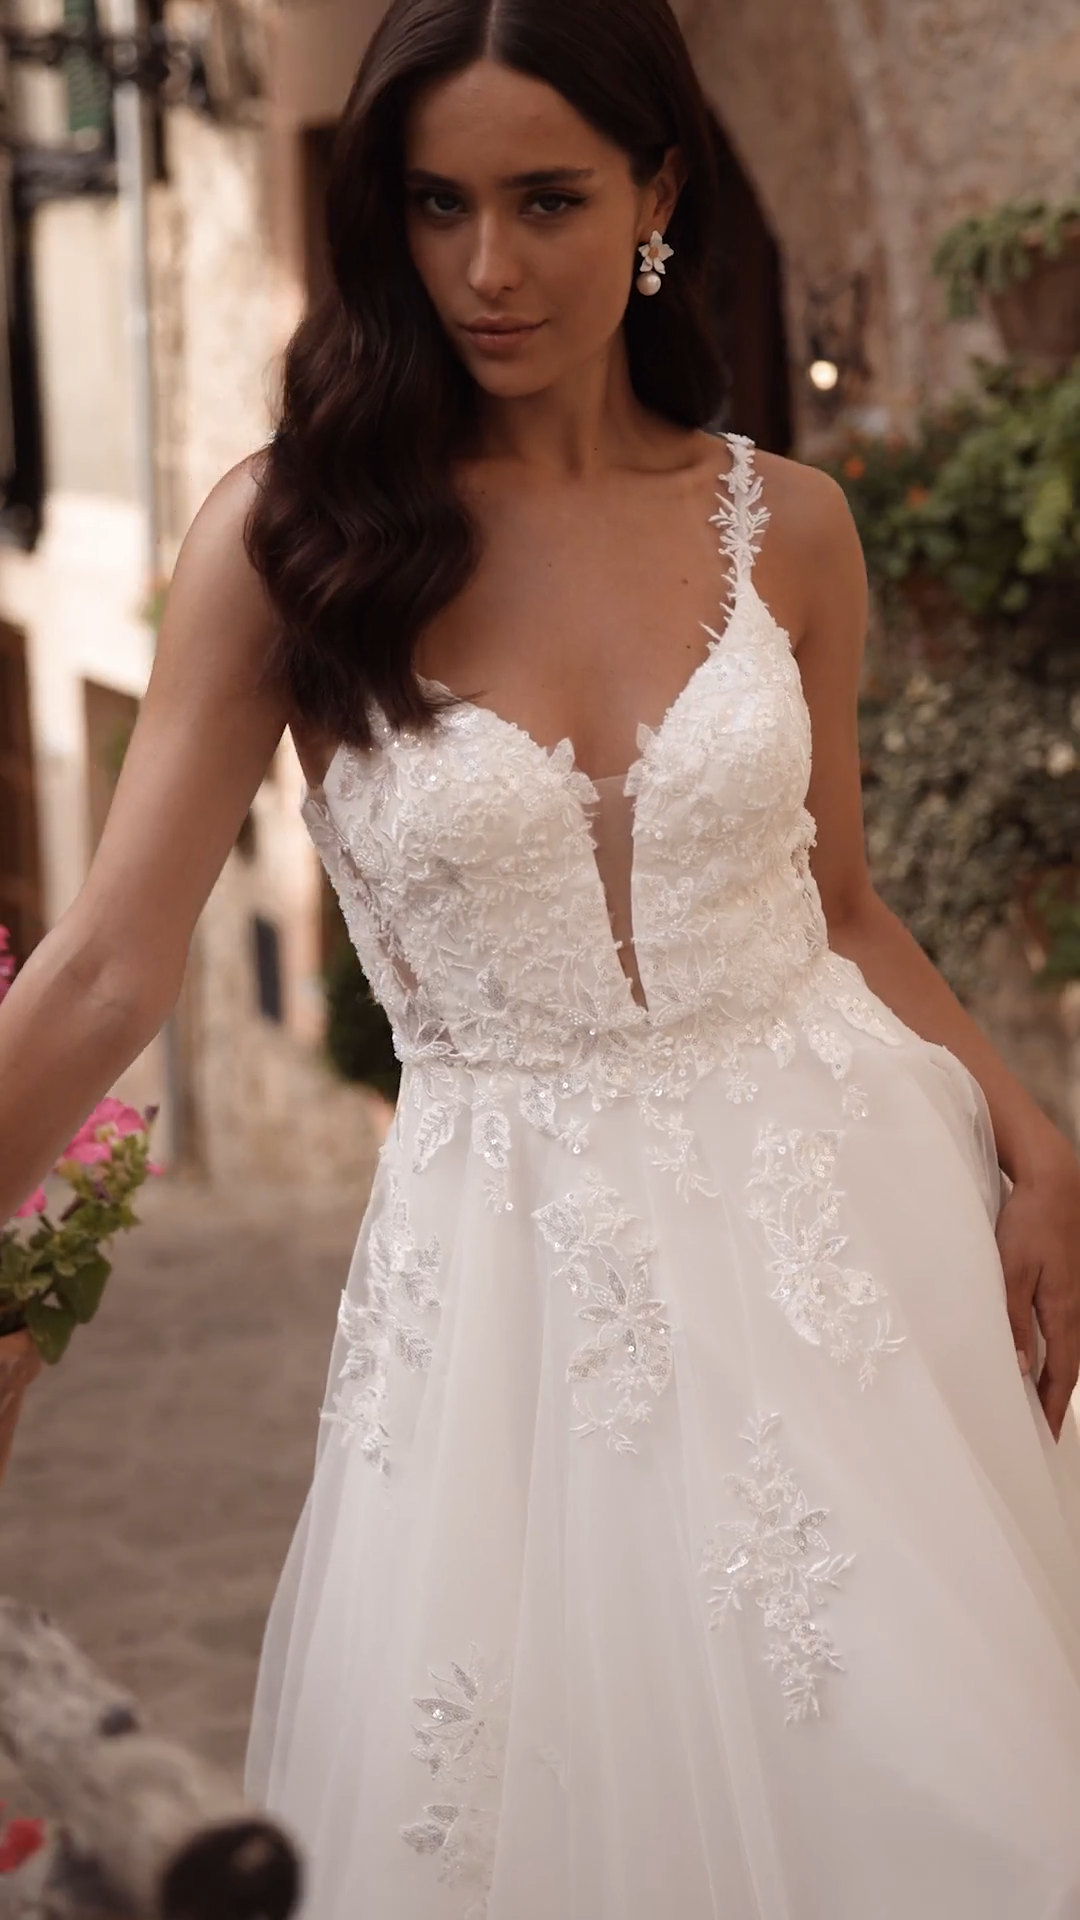 Bride wearing rustic tulle A-line wedding dress with side bodice cutouts and spaghetti straps